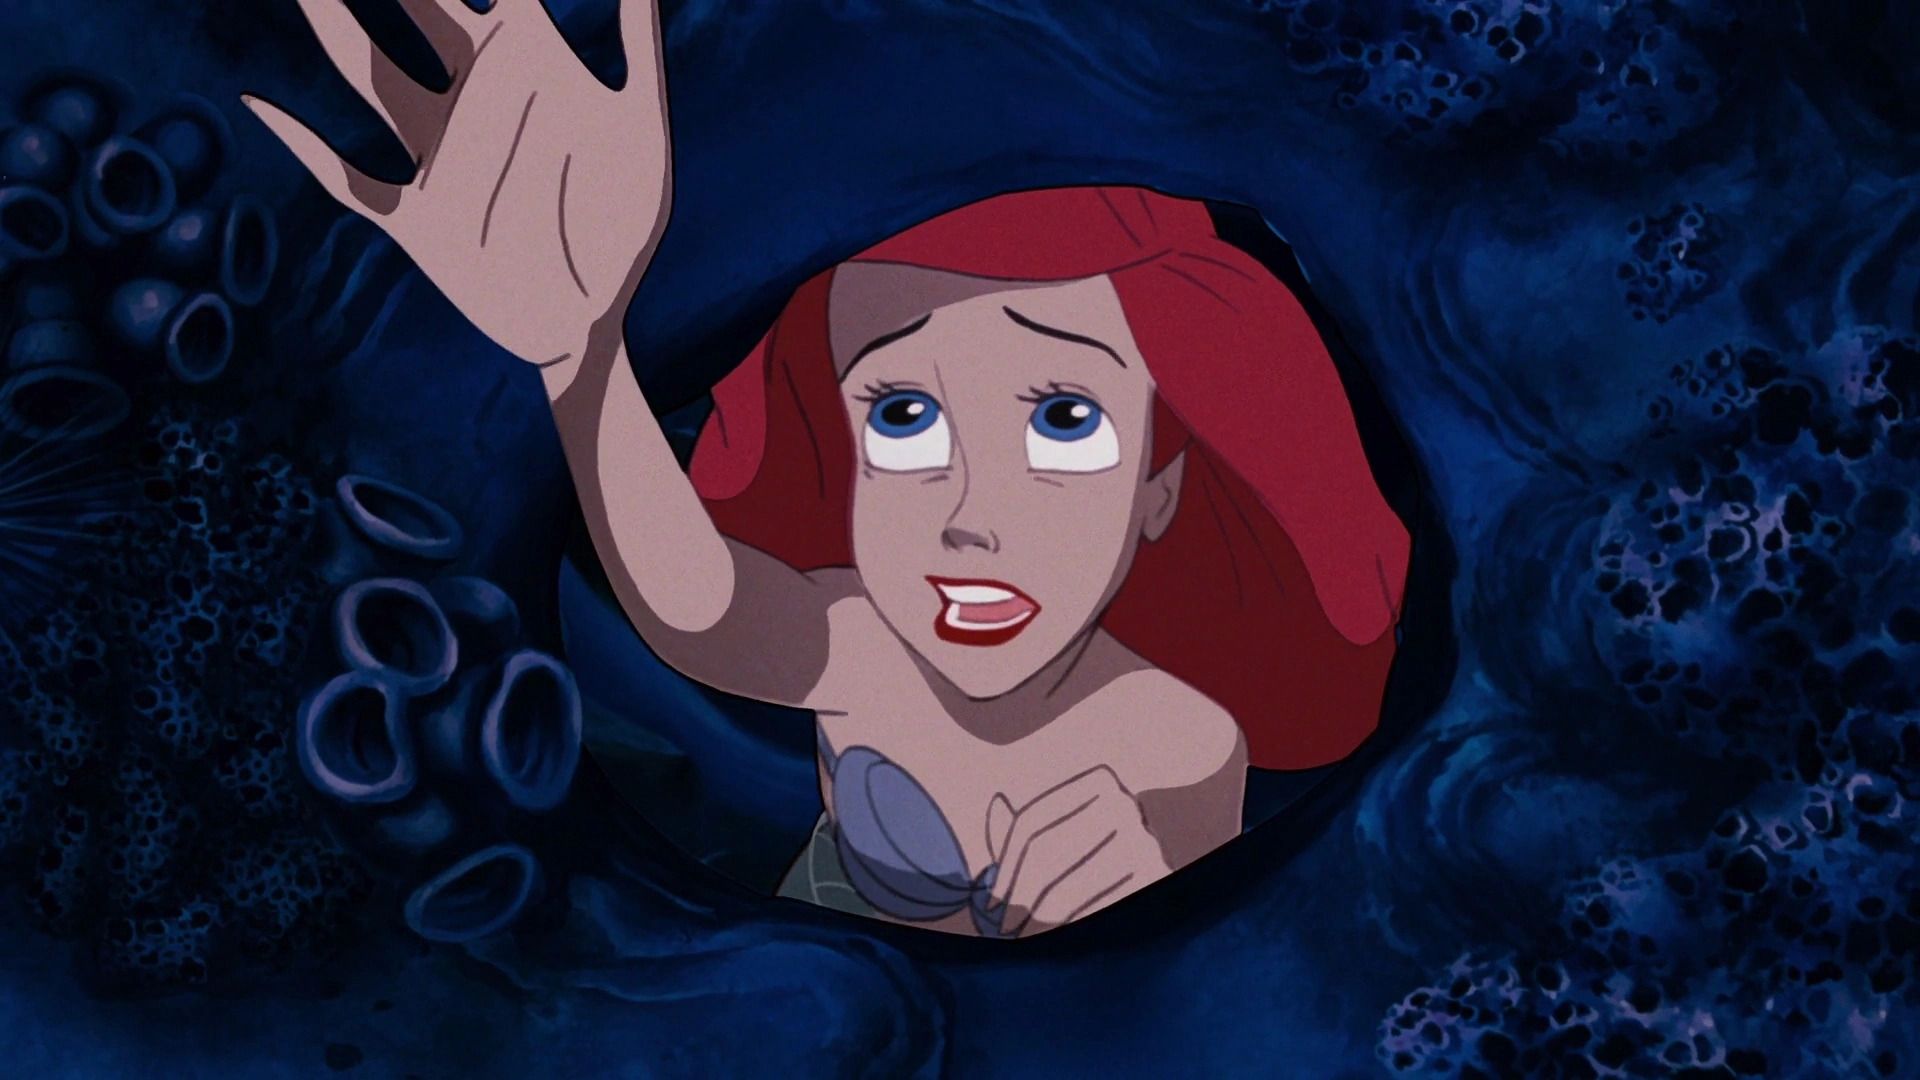 Ariel Singing Part Of Your World In The Little Mermaid 1989.jpg